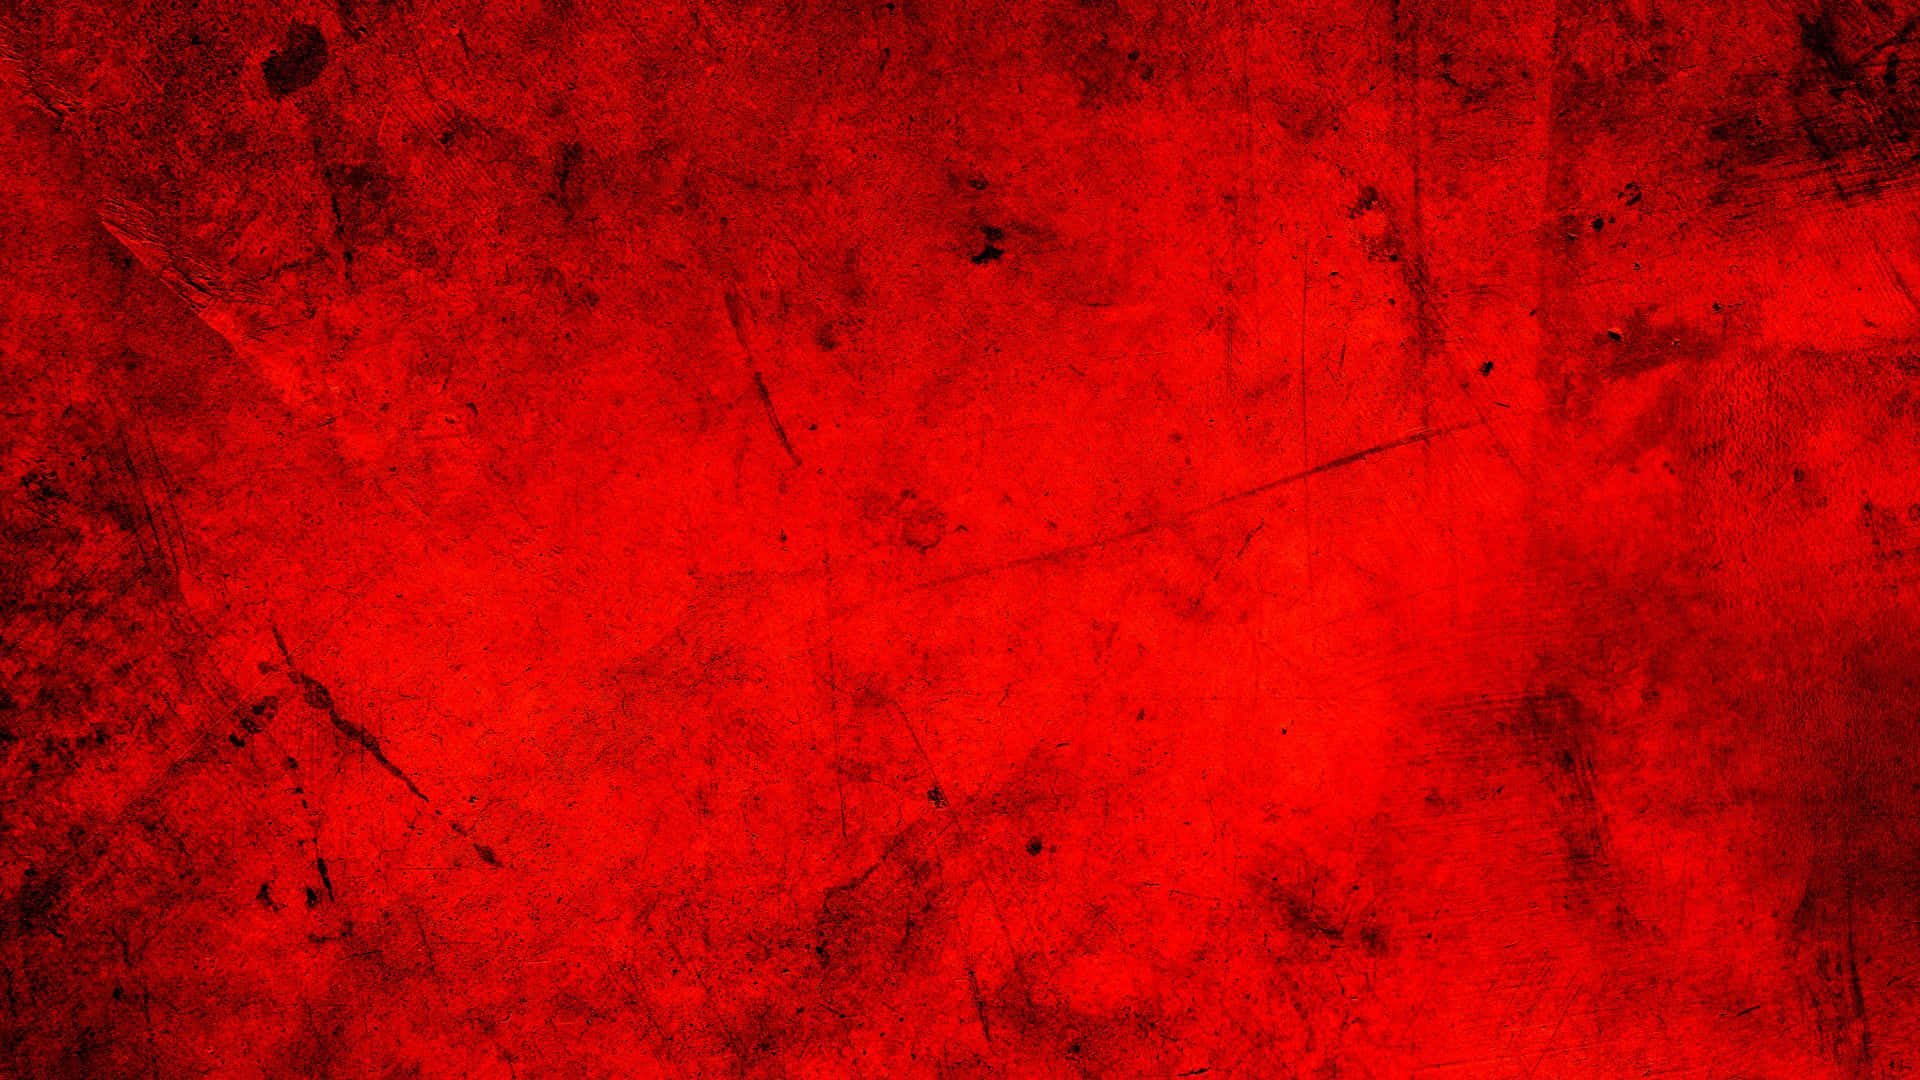 Red and Black Abstract Backgrounds (62+ pictures)